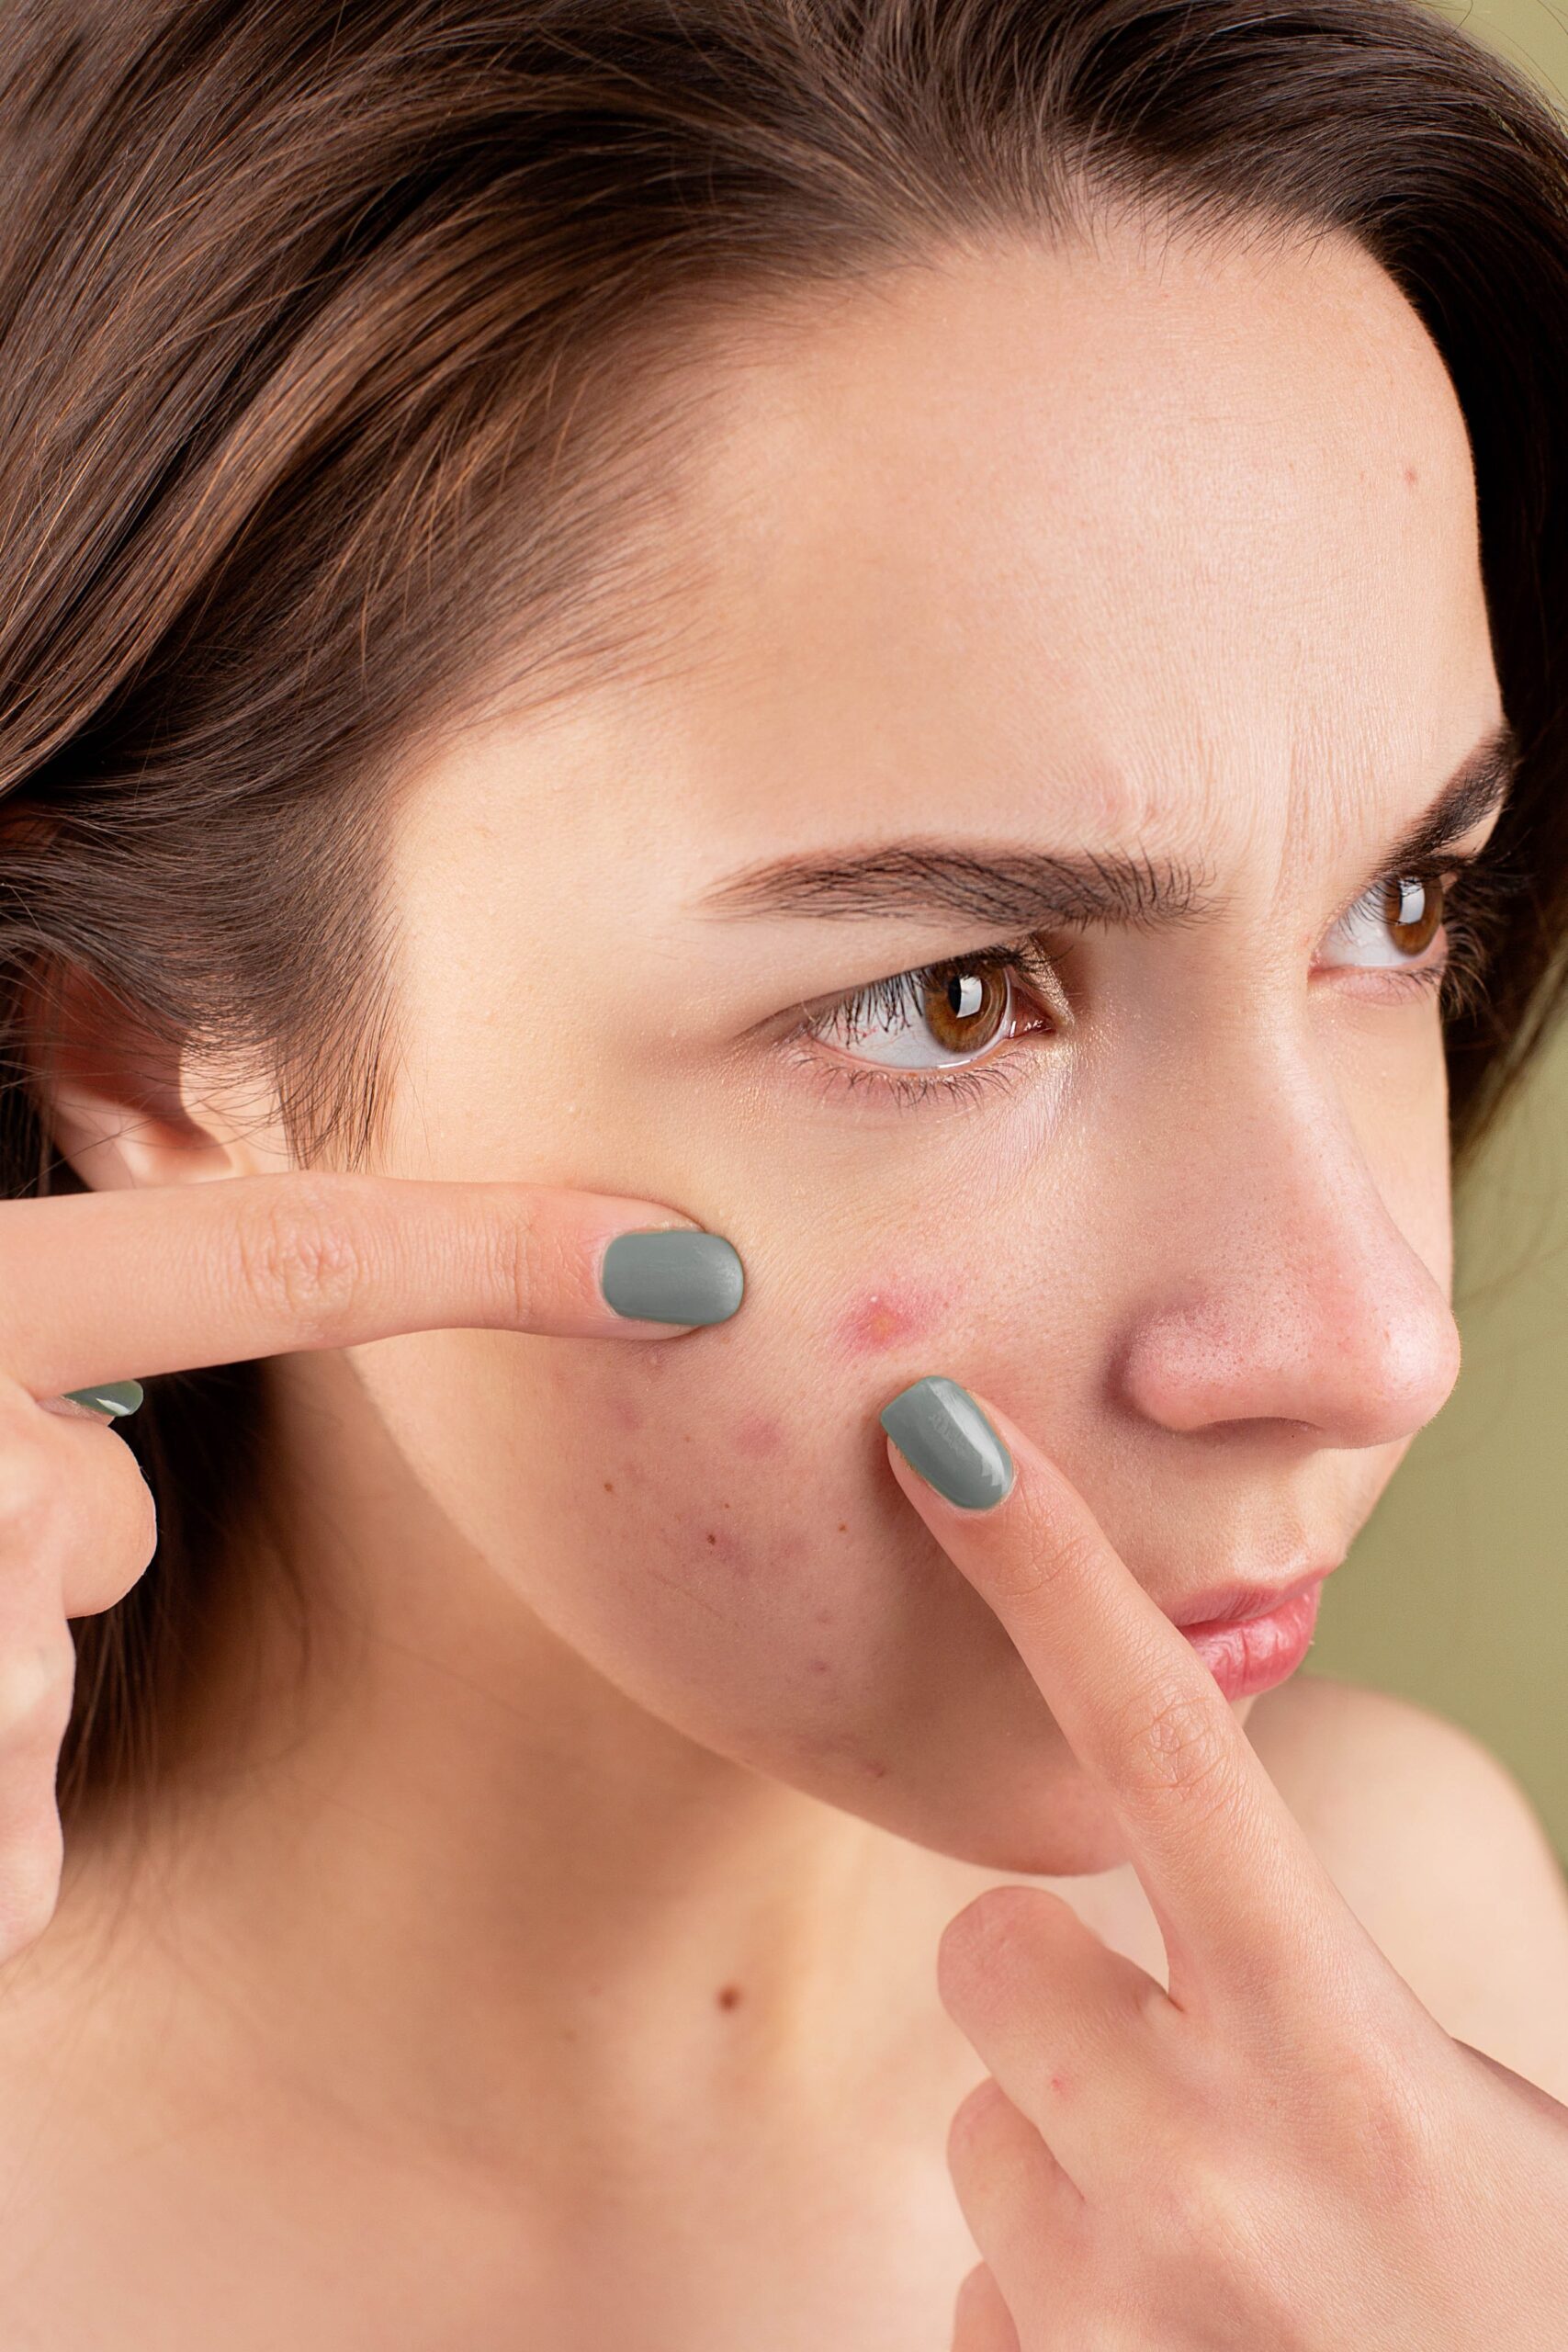 Laser Treatment For Acne: How Does It Work, Expectations And More